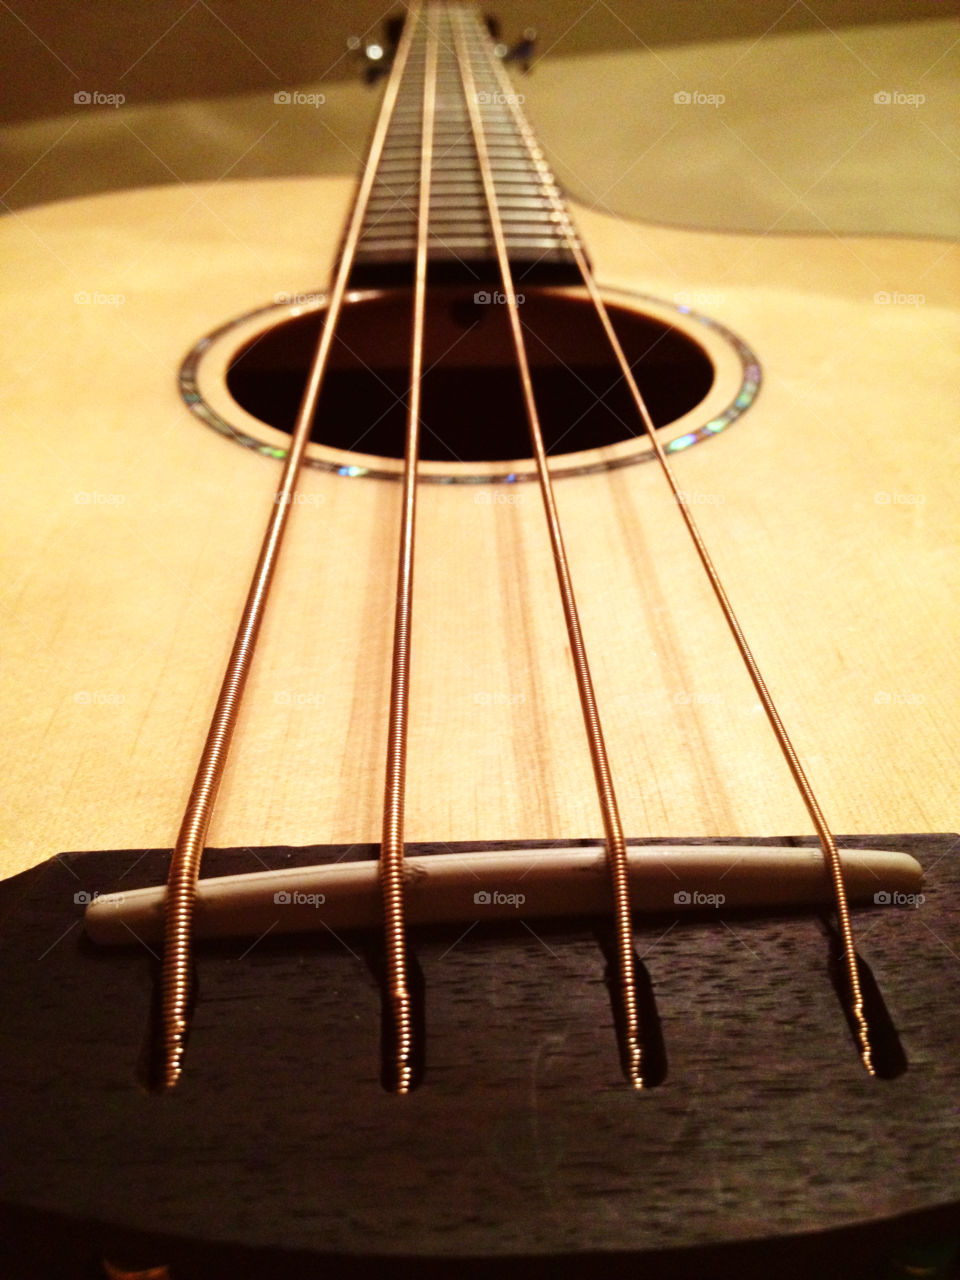 Down-Up look of an acoustic bass guitar.